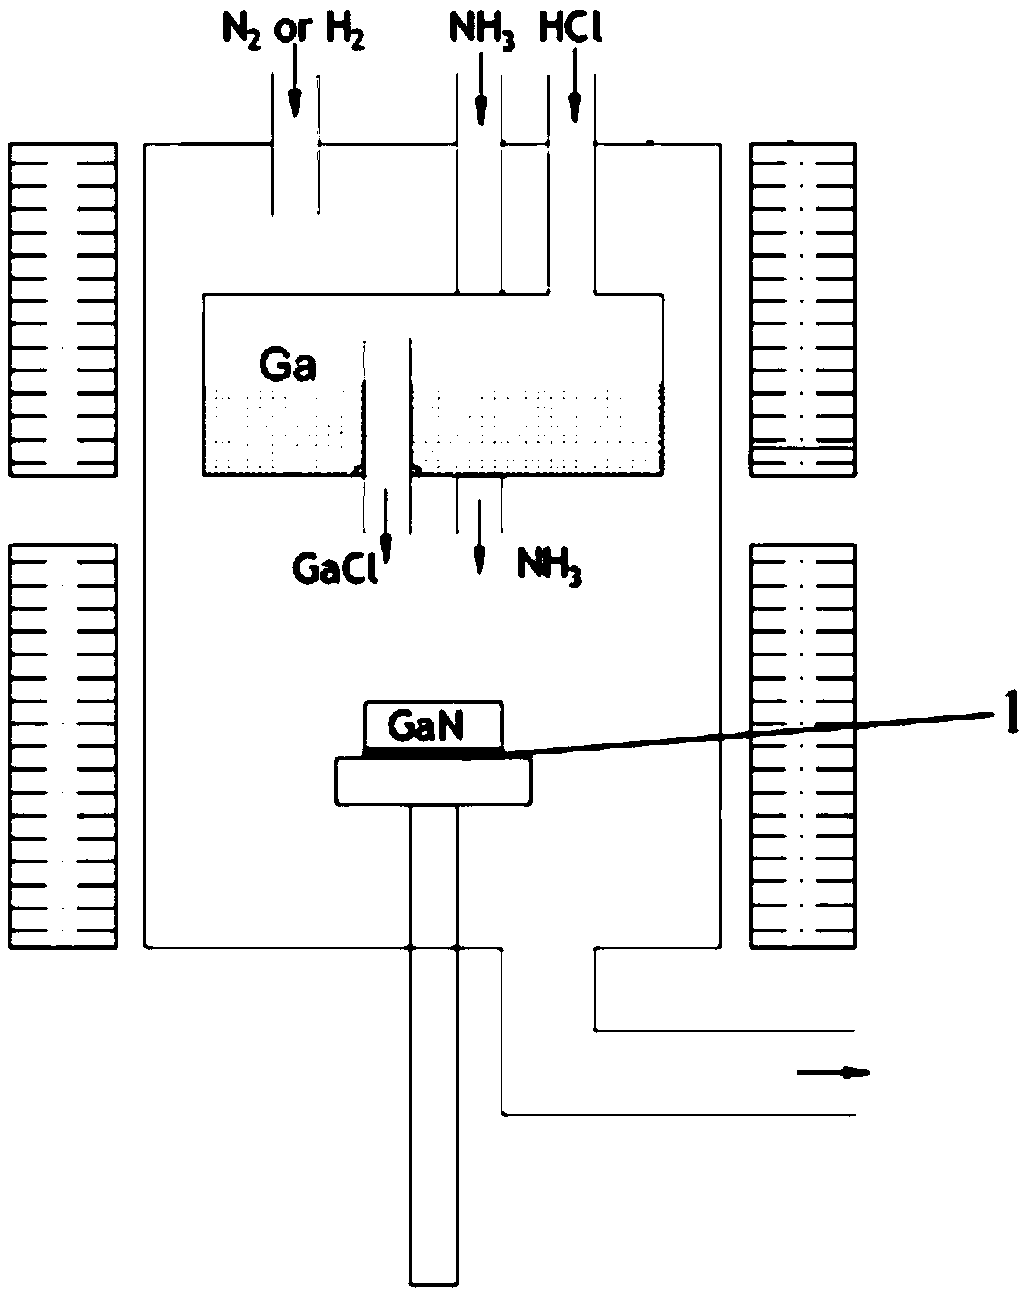 Hydride vapor phase epitaxy (HVPE) device capable of producing gallium nitride in batches